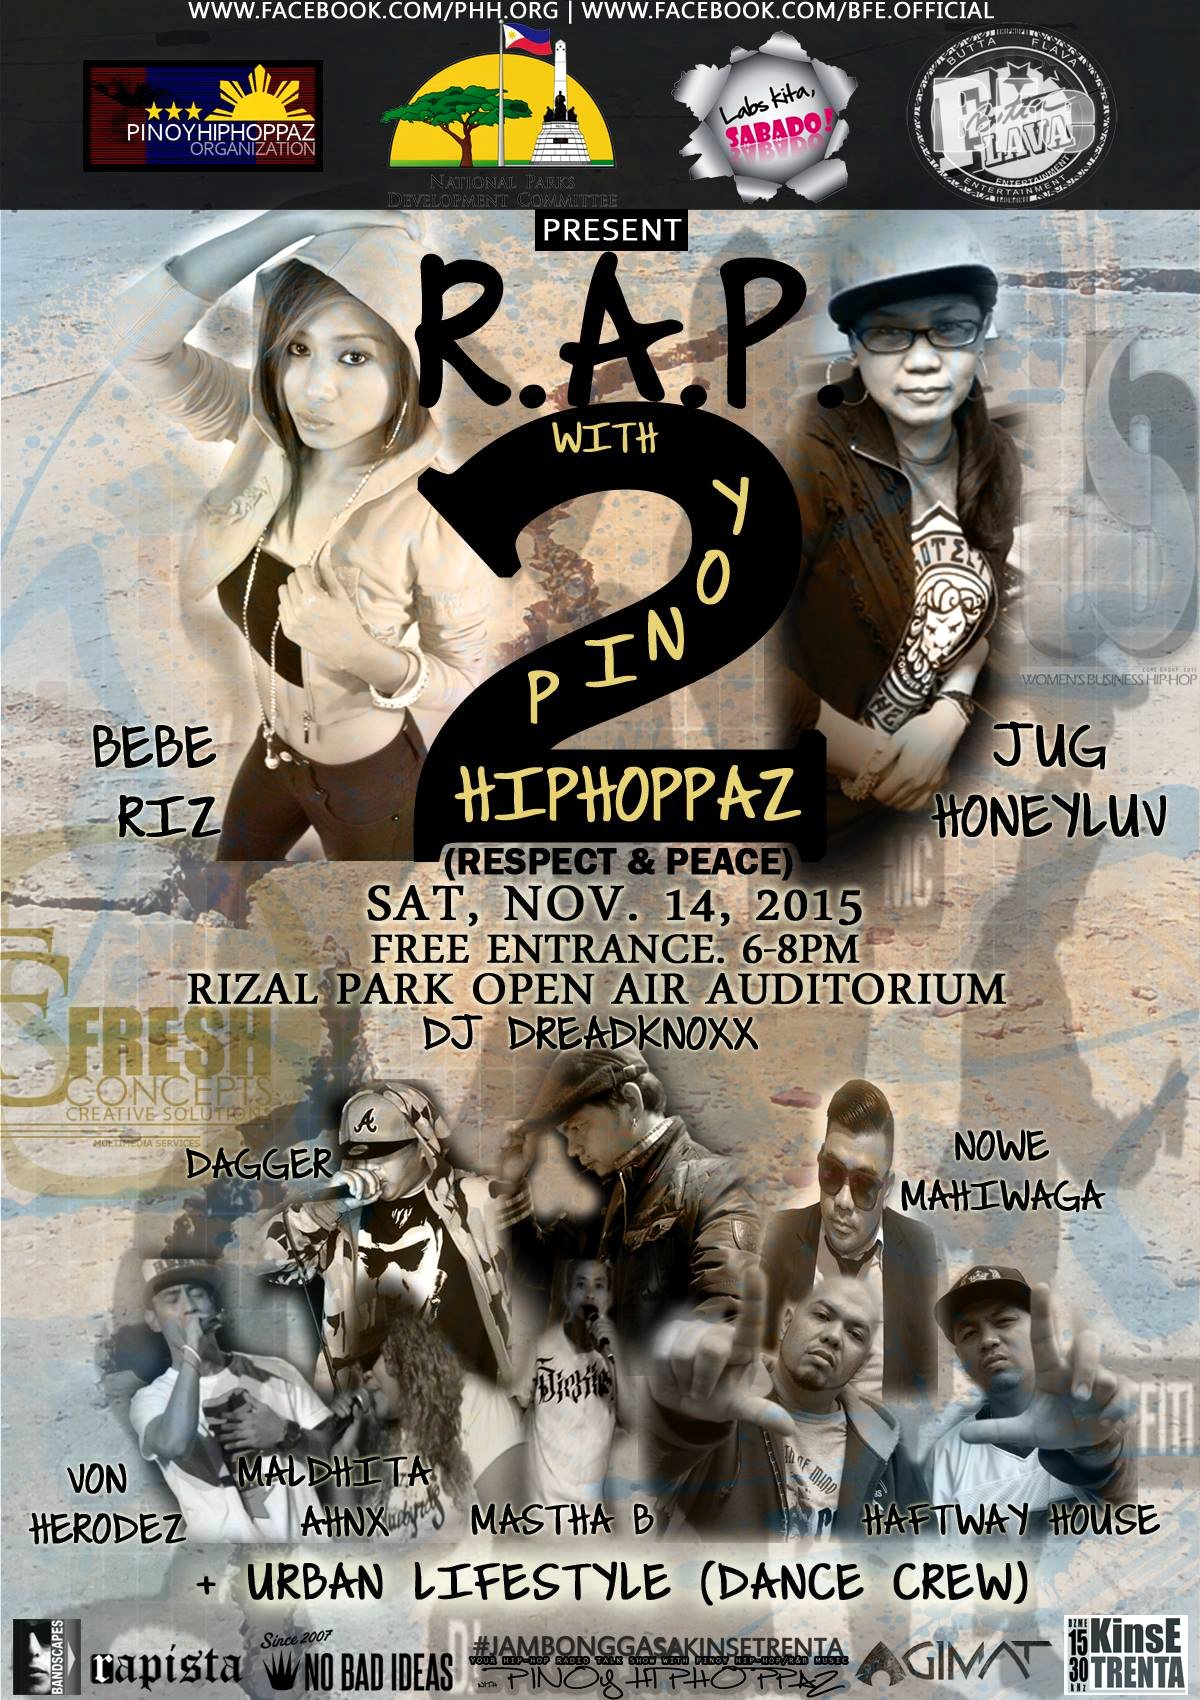 R.A.P. 2 with PINOY HIPHOPPAZ (Respect & Peace) Jug Honeyluv BFe Wbh·Sunday, November 1, 2015 “R.A.P. 2 WITH PINOY HIPHOPPAZ (Respect & Peace)” will be on Saturday, Nov. 14, 2015, 6-8pm at Rizal Park Open Air Auditorium as part of the weekly show, “Labs Kita, Sabado”. The 2 hour presentation will be headlined by 2 of the most active members of Women’s Business Hip Hop and the flag bearers of The Pinoy Hiphoppaz Organization: Jug Honeyluv & Bebe Riz. They also co-host and produce the only Hip Hop radio talk show, “Jambongga sa Kinse Trenta with Pinoy Hiphoppaz on DZME1530khz AM. For more info: www.facebook.com/Jambongga1530PHH EVENT PAGE: https://www.facebook.com/events/503... The Pinoy Hiphoppaz Organization www.facebook.com/phh.org & Butta-Flava Entertainment Present R.A.P. 2 with PINOY HIPHOPPAZ (Respect & Peace) Saturday, Nov. 14, 2015, 5:30pm to 8pm FREE ENTRANCE / NO DOOR CHARGE Rizal Park Open Air Auditorium (LUNETA) The strictly 2-hour presentation / mini-concert will feature the ff. artists (members and friends of the Pinoy Hiphoppaz - #FriendsofPHH) and is a part of "LABS KITA, SABADO", the weekly Saturday show at Rizal Park. BEBE RIZ MALDHITA AHNX VON HERODEZ MASTHA B NOWE MAHIWAGA DAGGER HAFTWAY HOUSE and JUG HONEYLUV + Dancers (URBAN LIFESTYLE) On the Deck: DJ DREADKNOXX More details and updates to be posted, regularly, so check back. ACKNOWLEDGEMENTS: National Parks Development Committee | Bandstand Philippines | Bandscapes Agimat | Rapista | Jambongga Sa Kinse Trenta w/ Pinoy Hiphoppaz | No Bad Ideas Clothing Company *Part 1 of R.A.P. with Pinoy Hiphoppaz was held on Saturday, July 4, 2015 at EGI Mall, now known as Taft Central Exchange (TCE) located on Taft Ave. corner Buendia Ave., Pasay City.